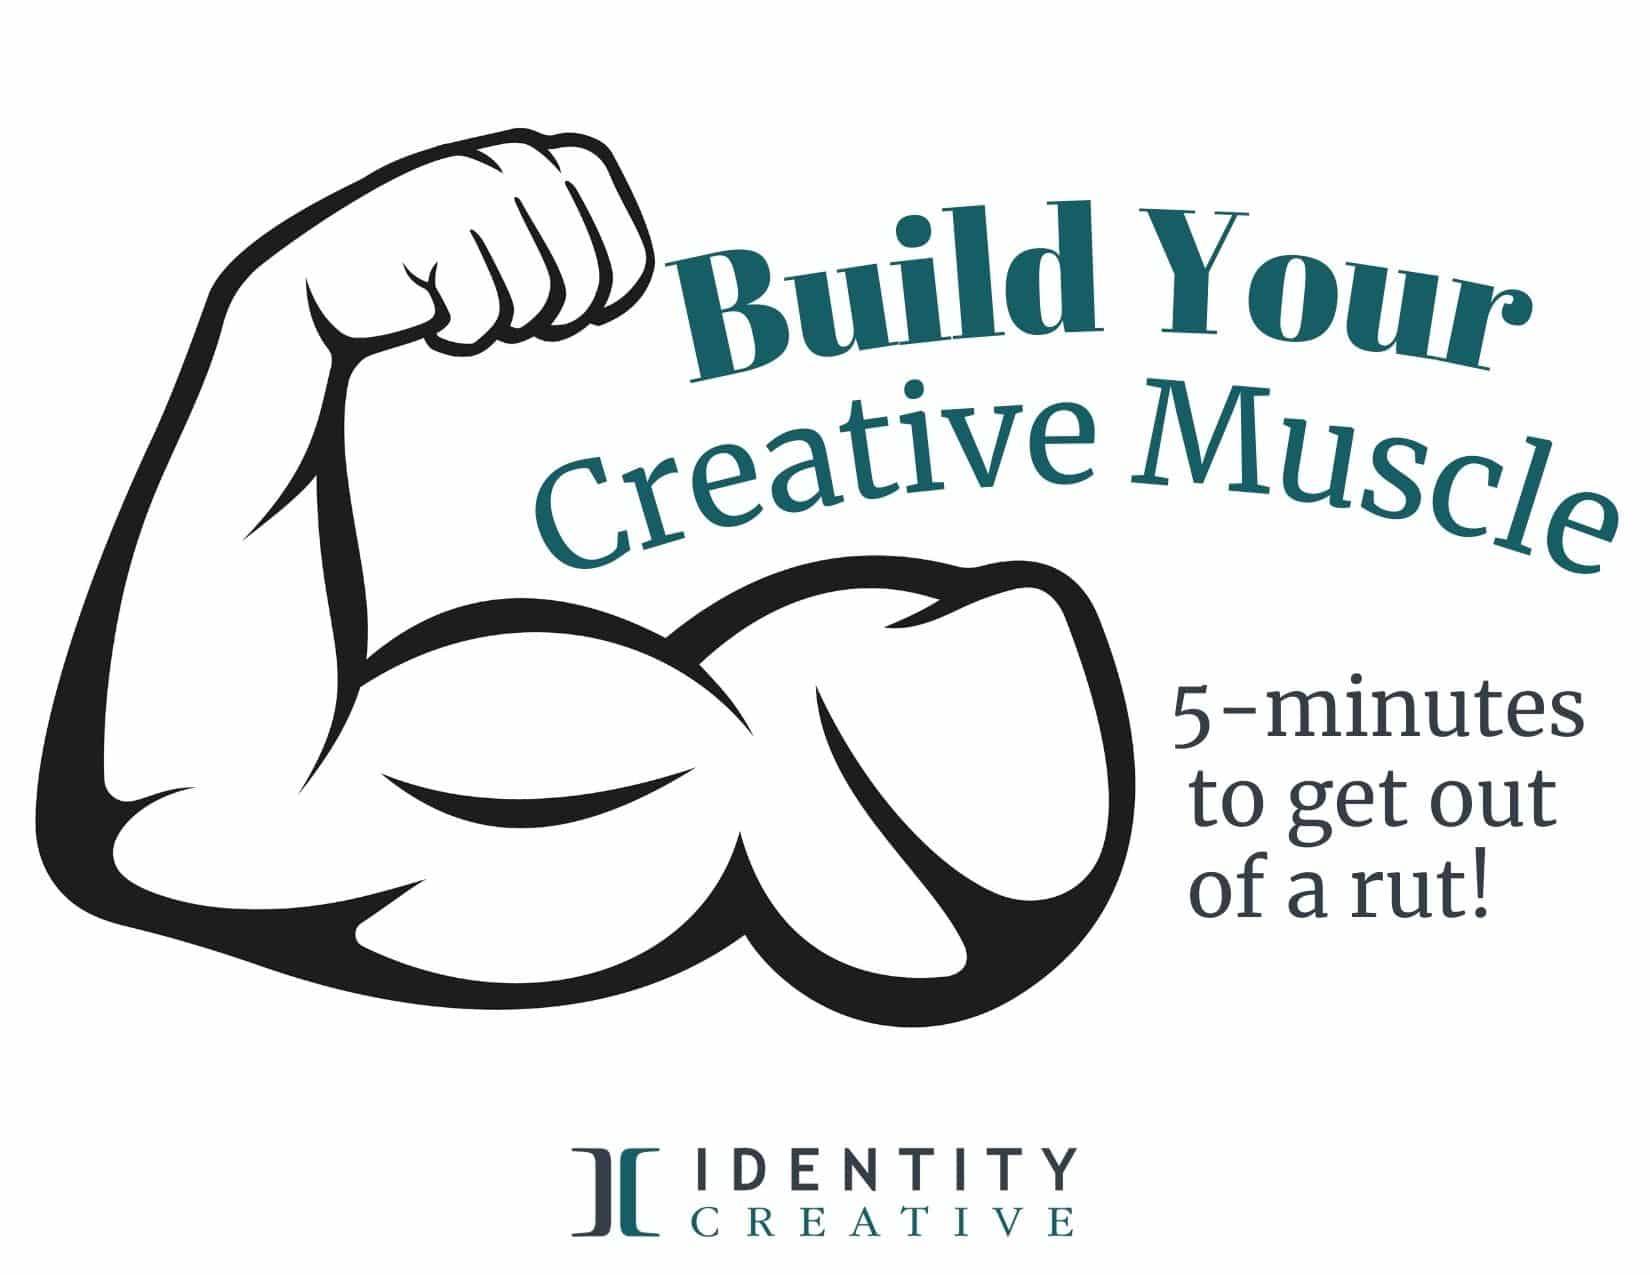 Build Your Creative Muscle: Get Your Brain Out of a Rut in 5 Minutes